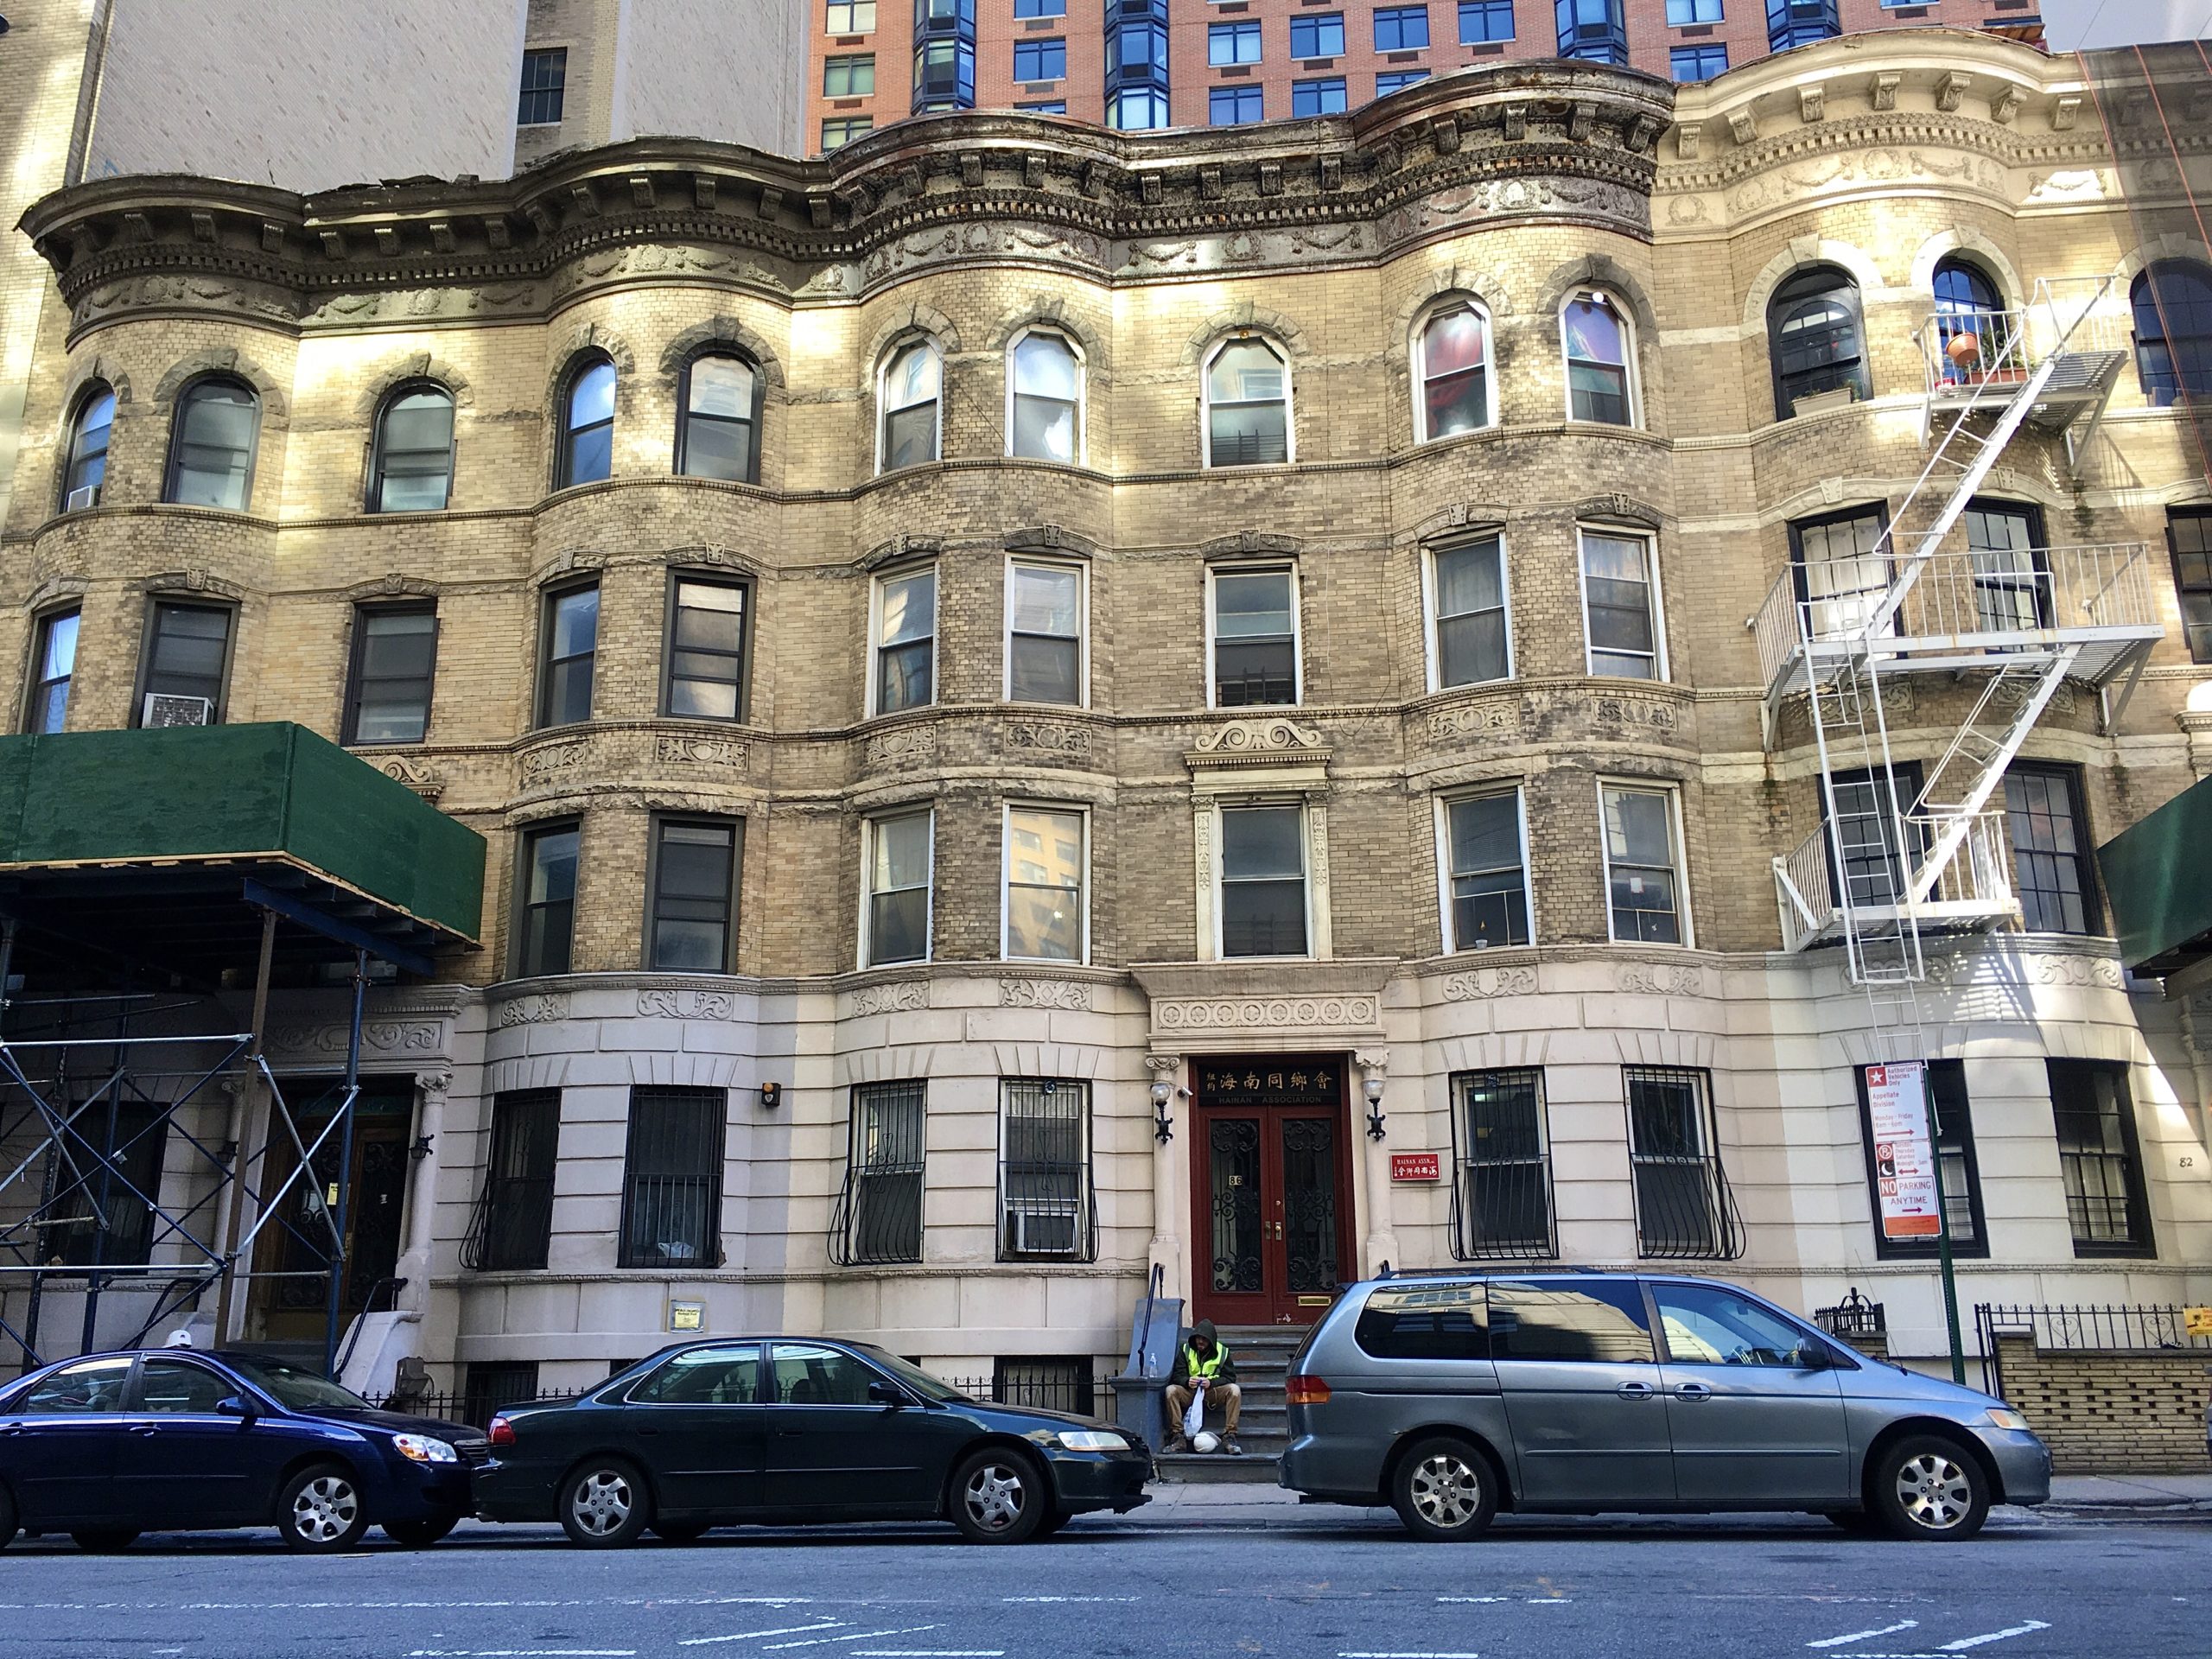 The current owner of 88 Schermerhorn St., the townhouse at left, plans to tear it down and build a hotel. Photo: Lore Croghan/Brooklyn Eagle